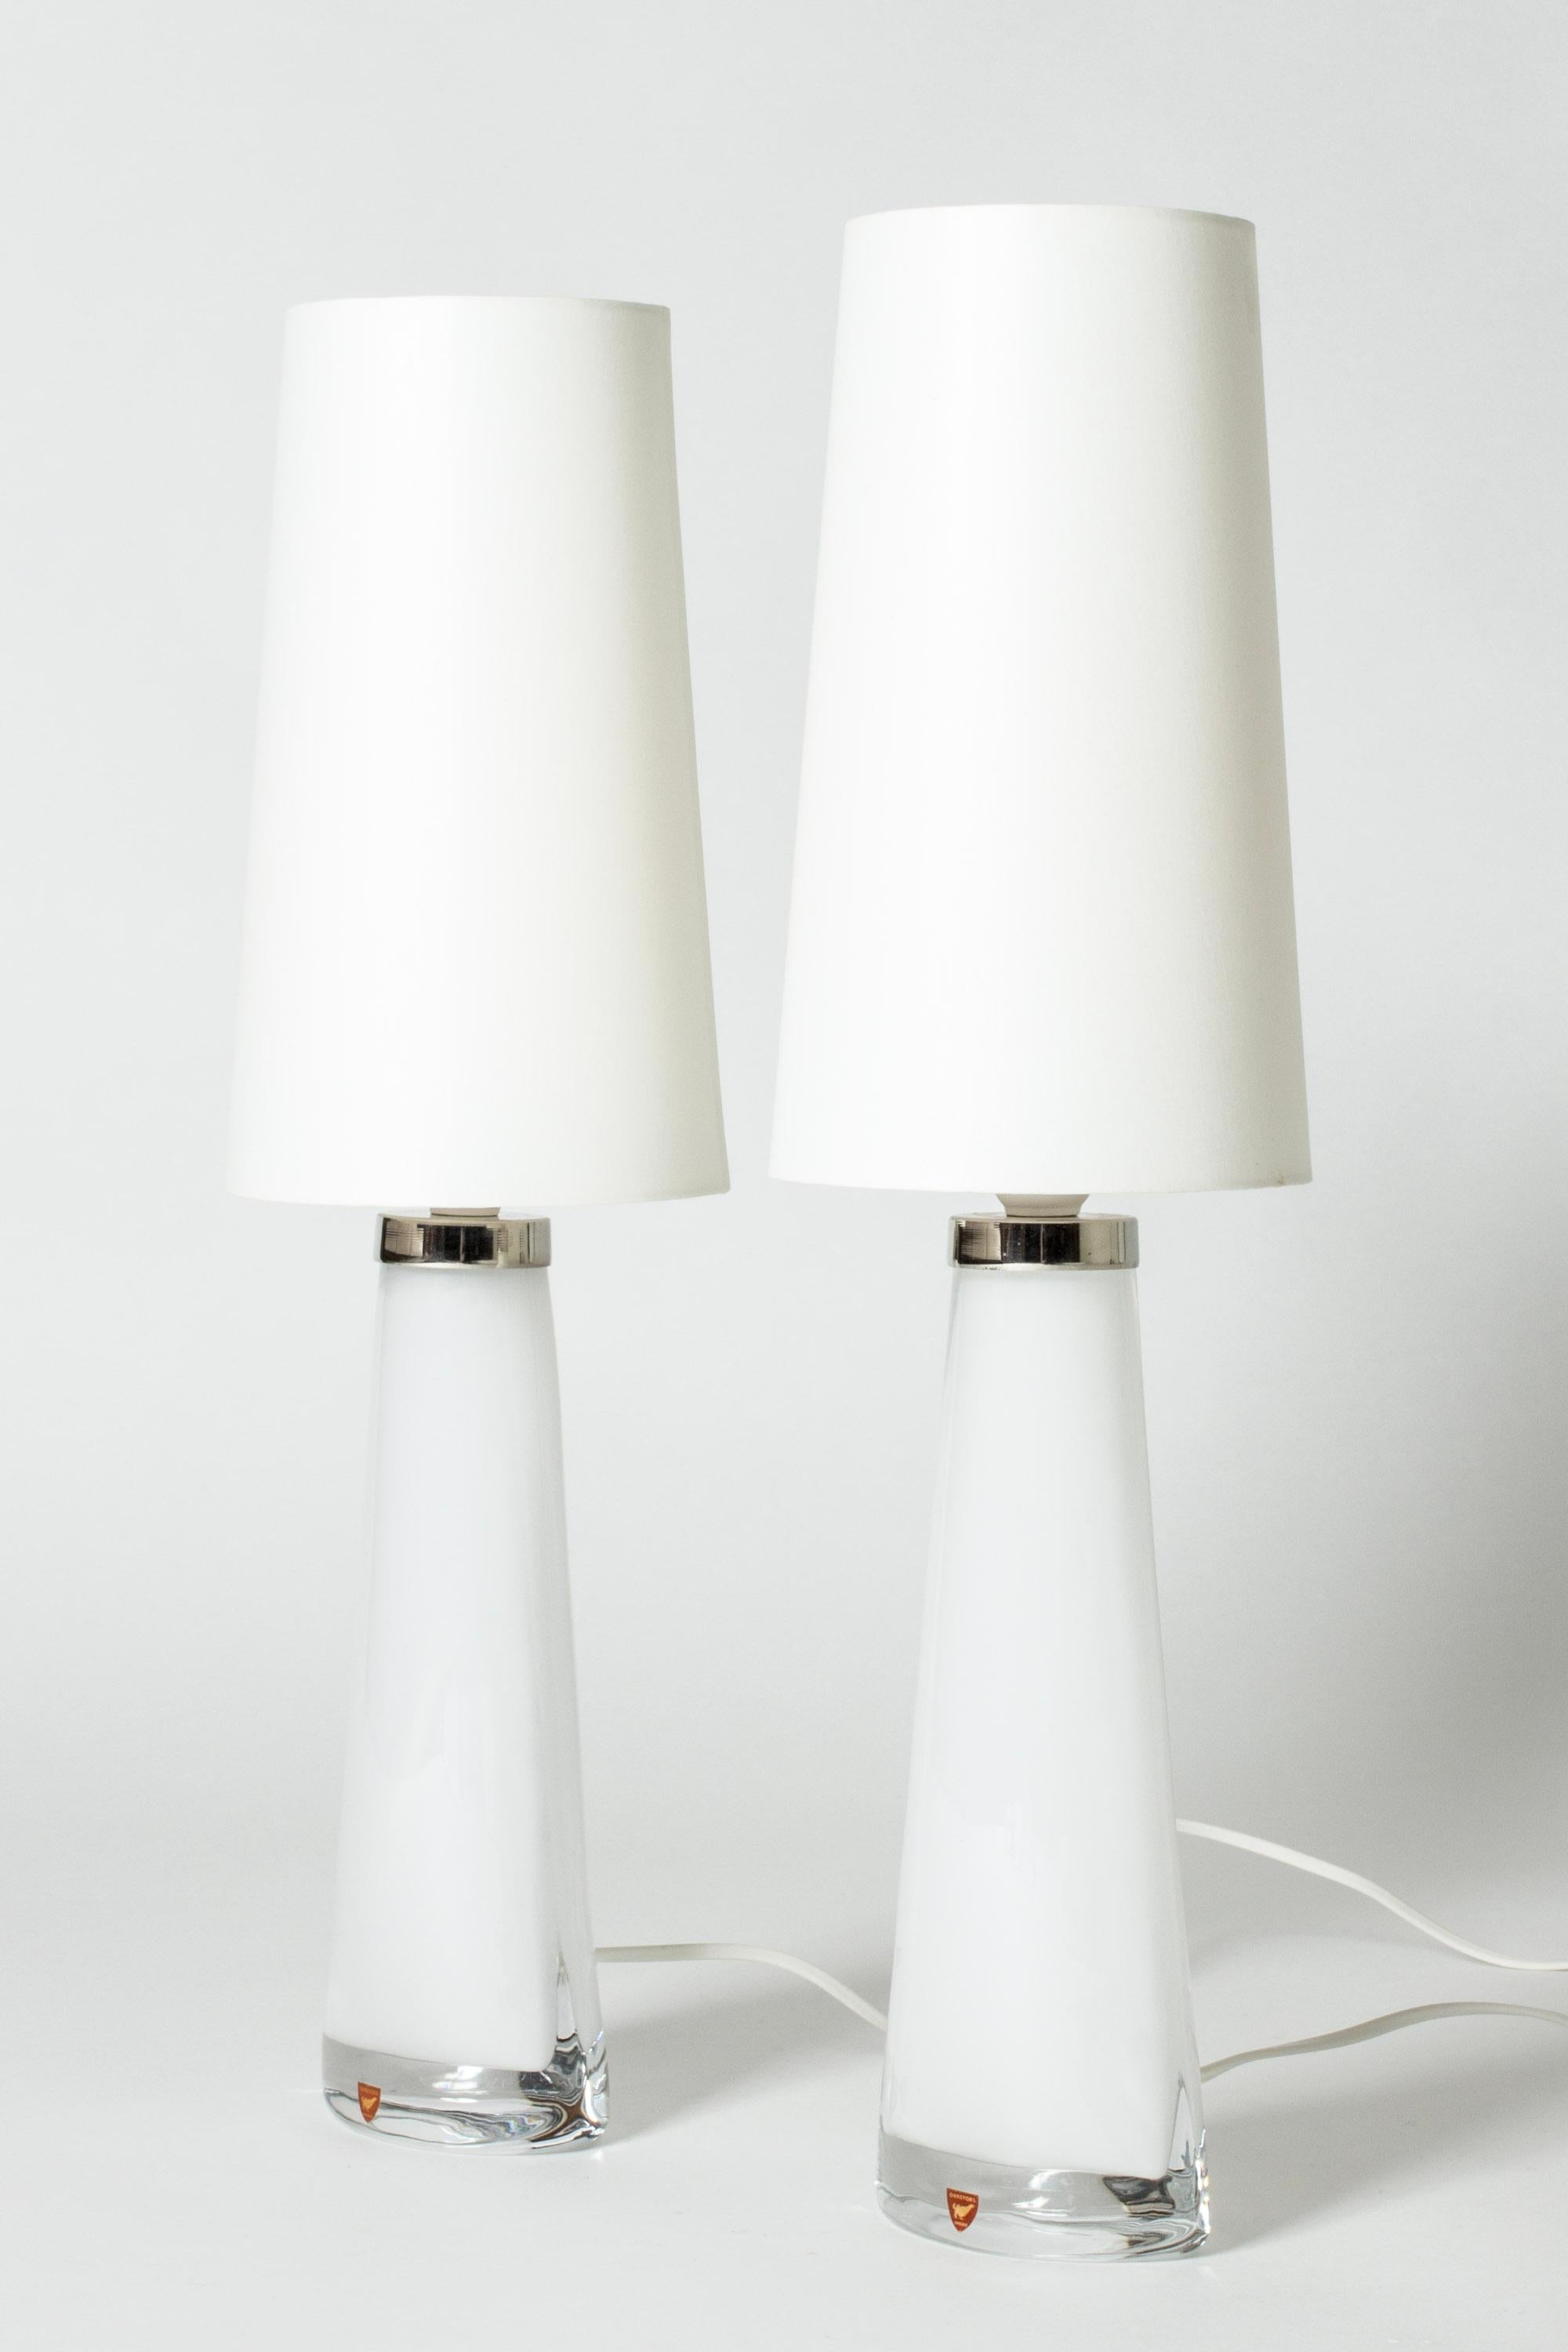 Scandinavian Modern Midcentury Glass Table Lamps by Carl Fagerlund, Orrefors, Sweden, 1960s For Sale